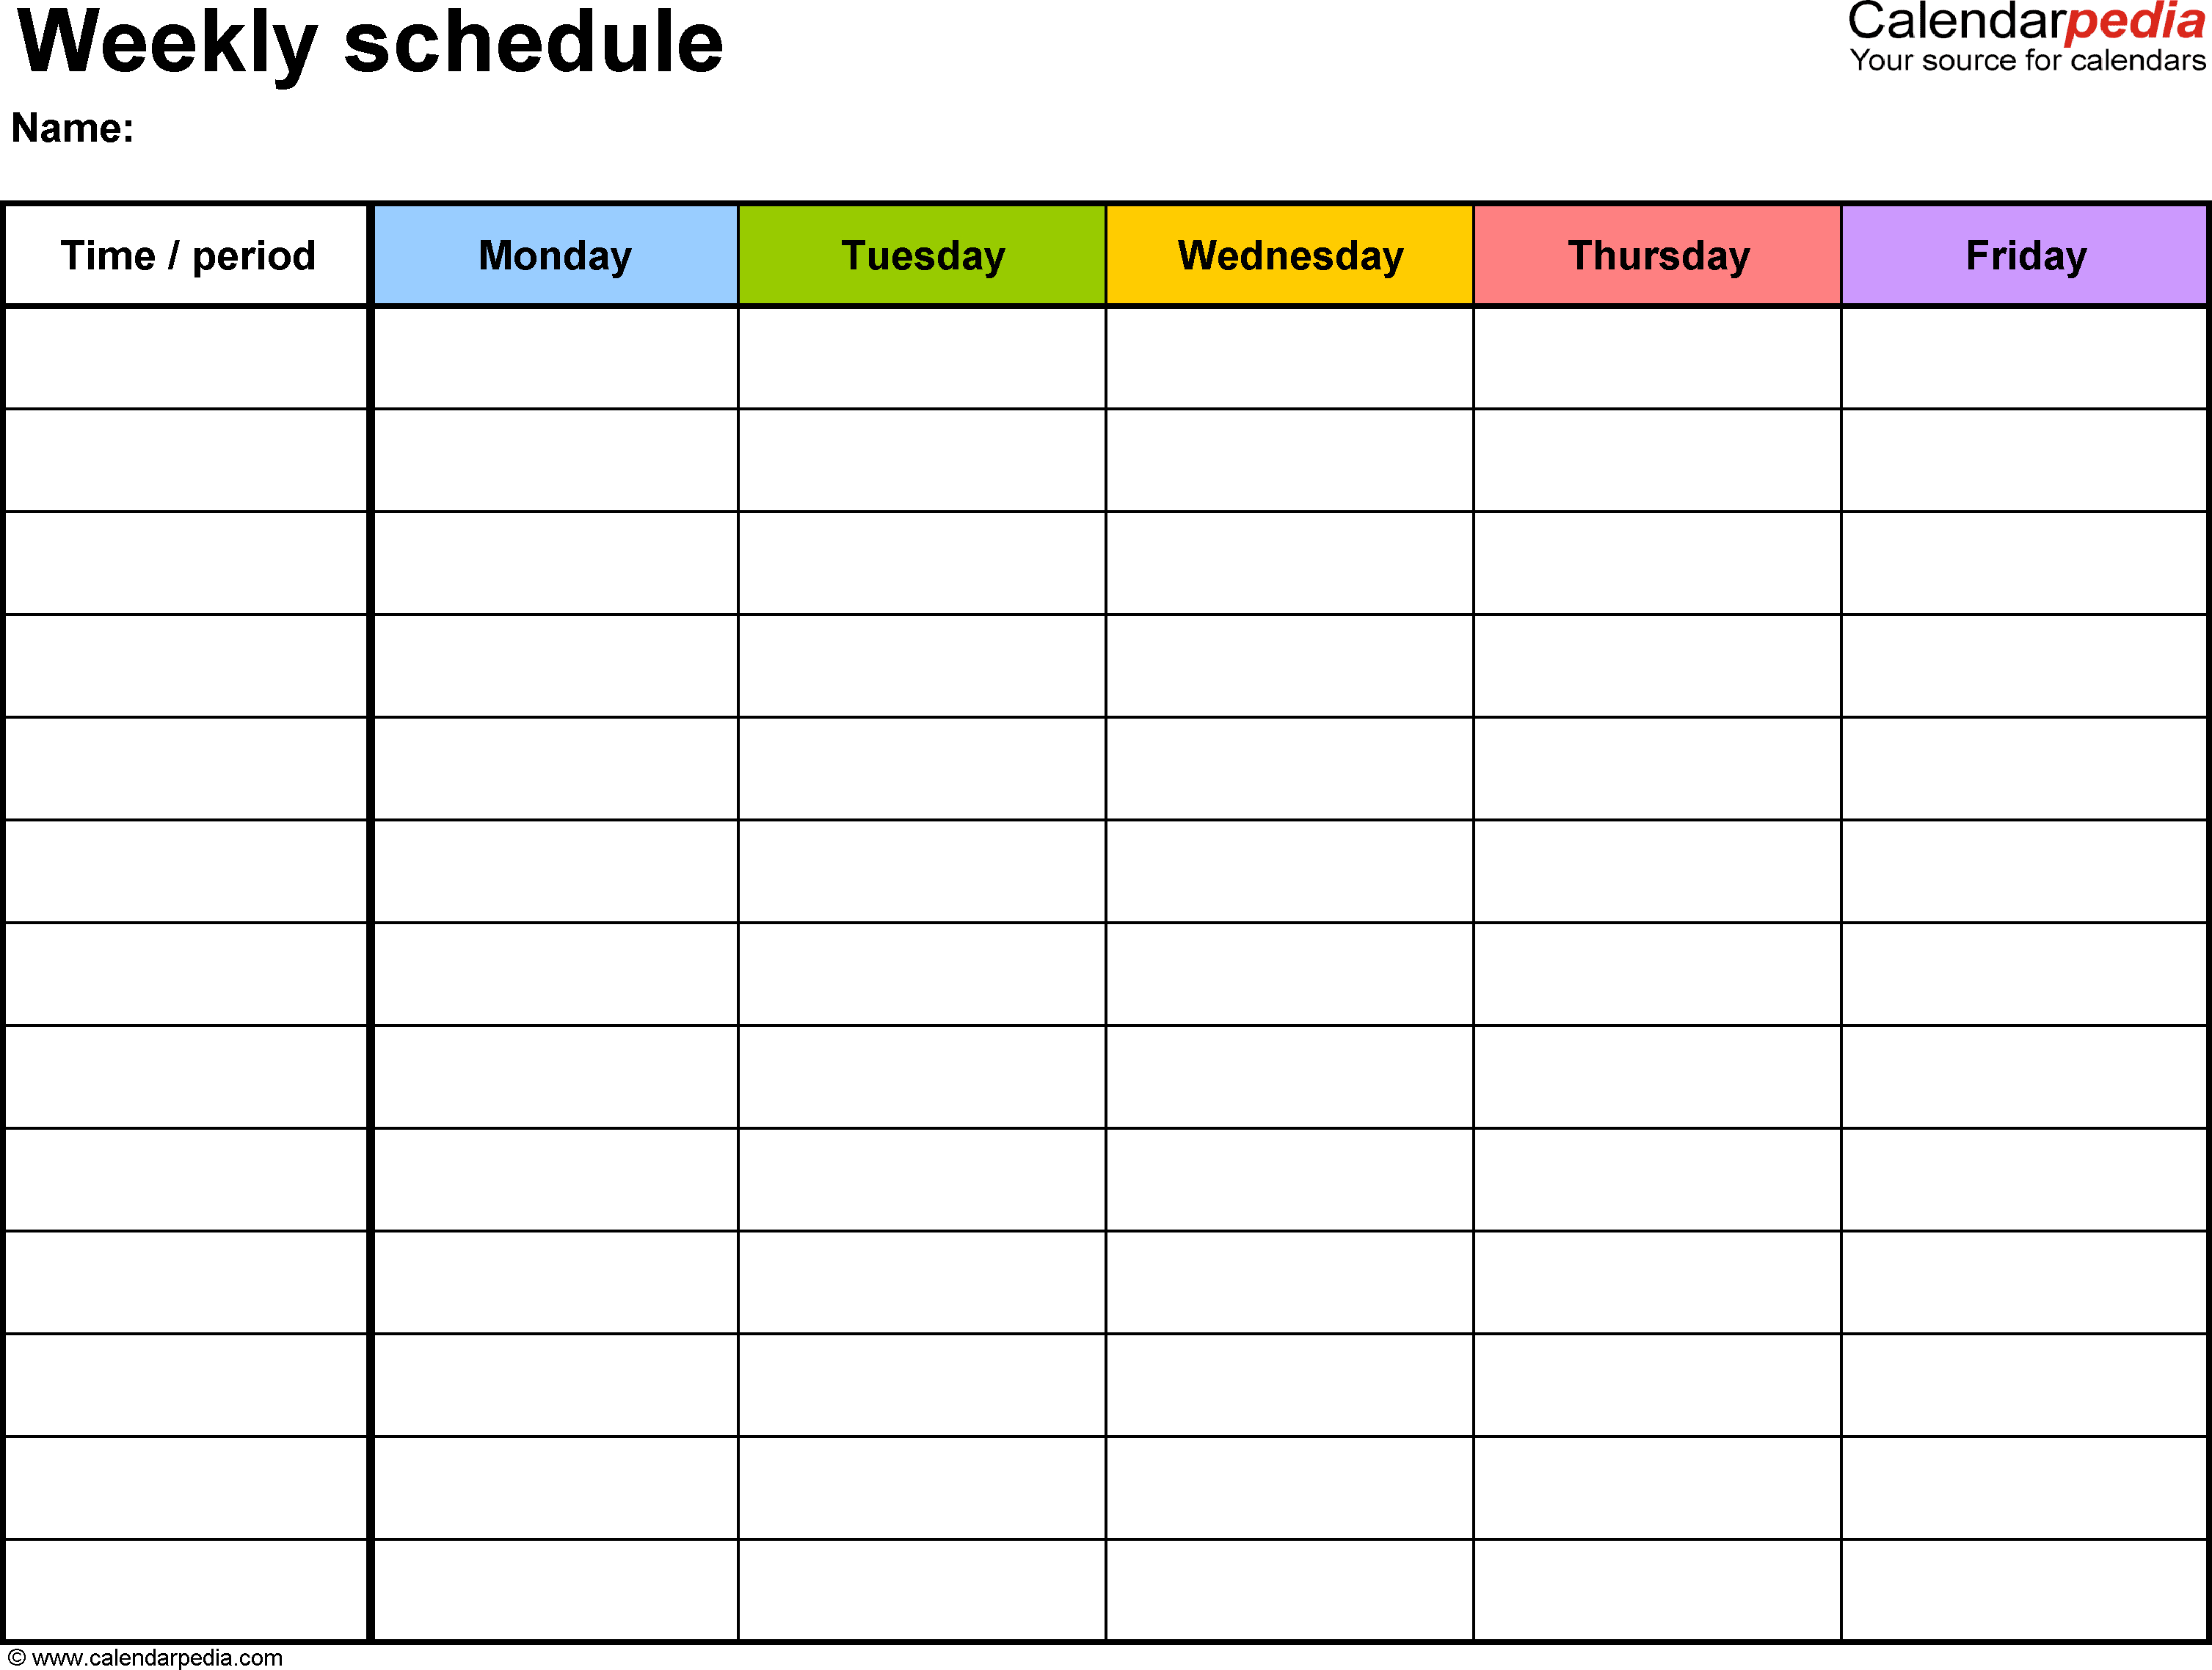 Excel Spreadsheet Templates Calendar Intended For Free Weekly Schedule Templates For Excel  18 Templates